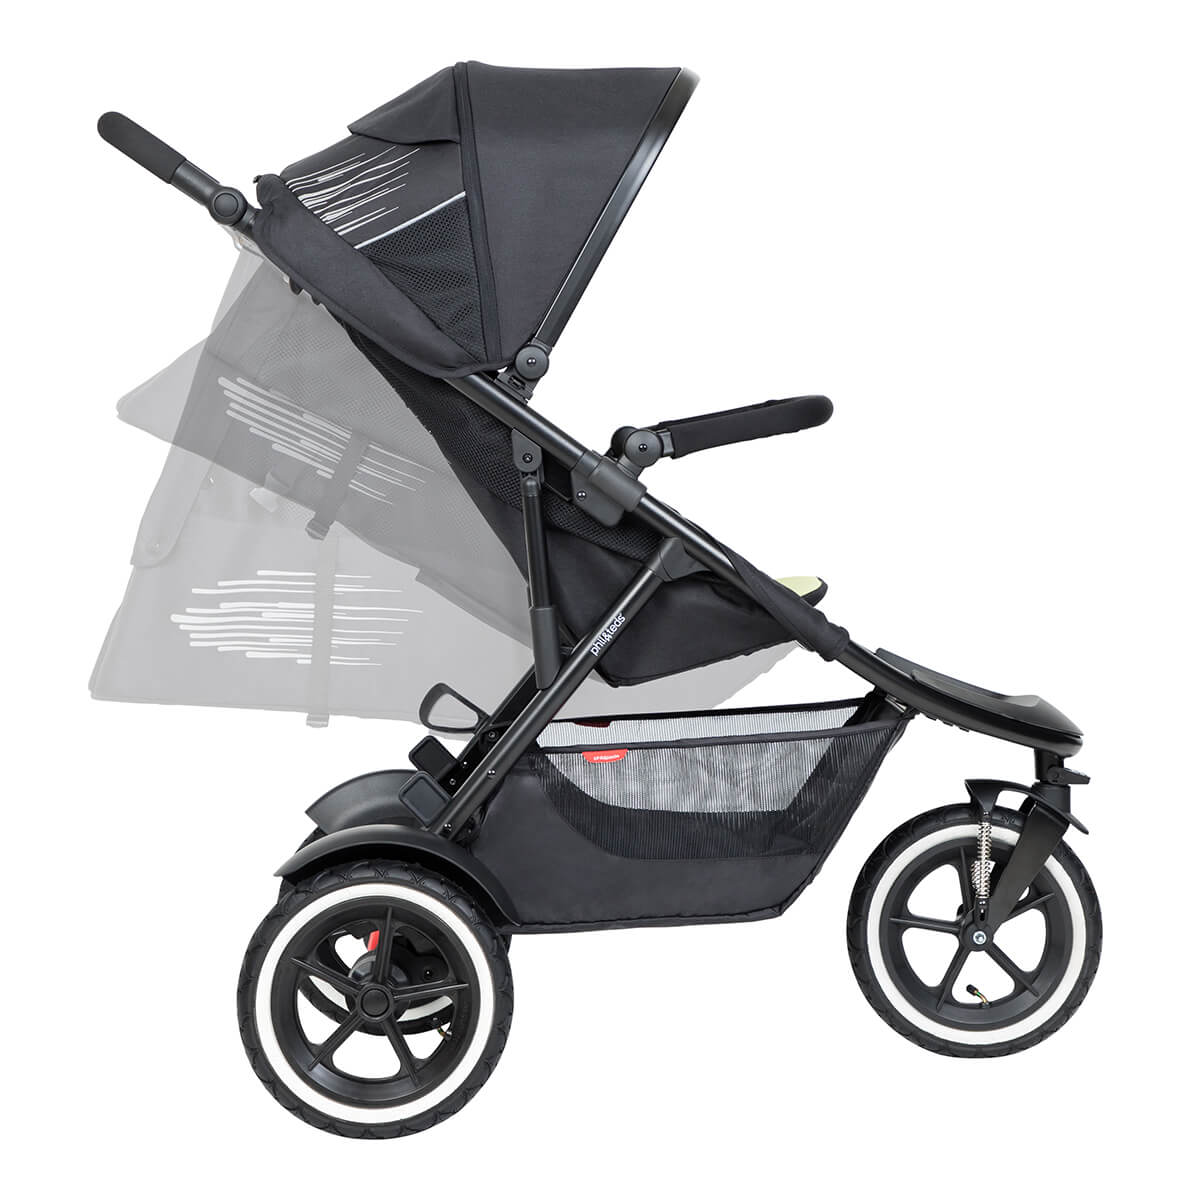 https://cdn.accentuate.io/7888305160362/19793939267754/philteds-sport-buggy-can-recline-in-multiple-angles-including-full-recline-for-newborn-baby-v1700691758422.jpg?1200x1200